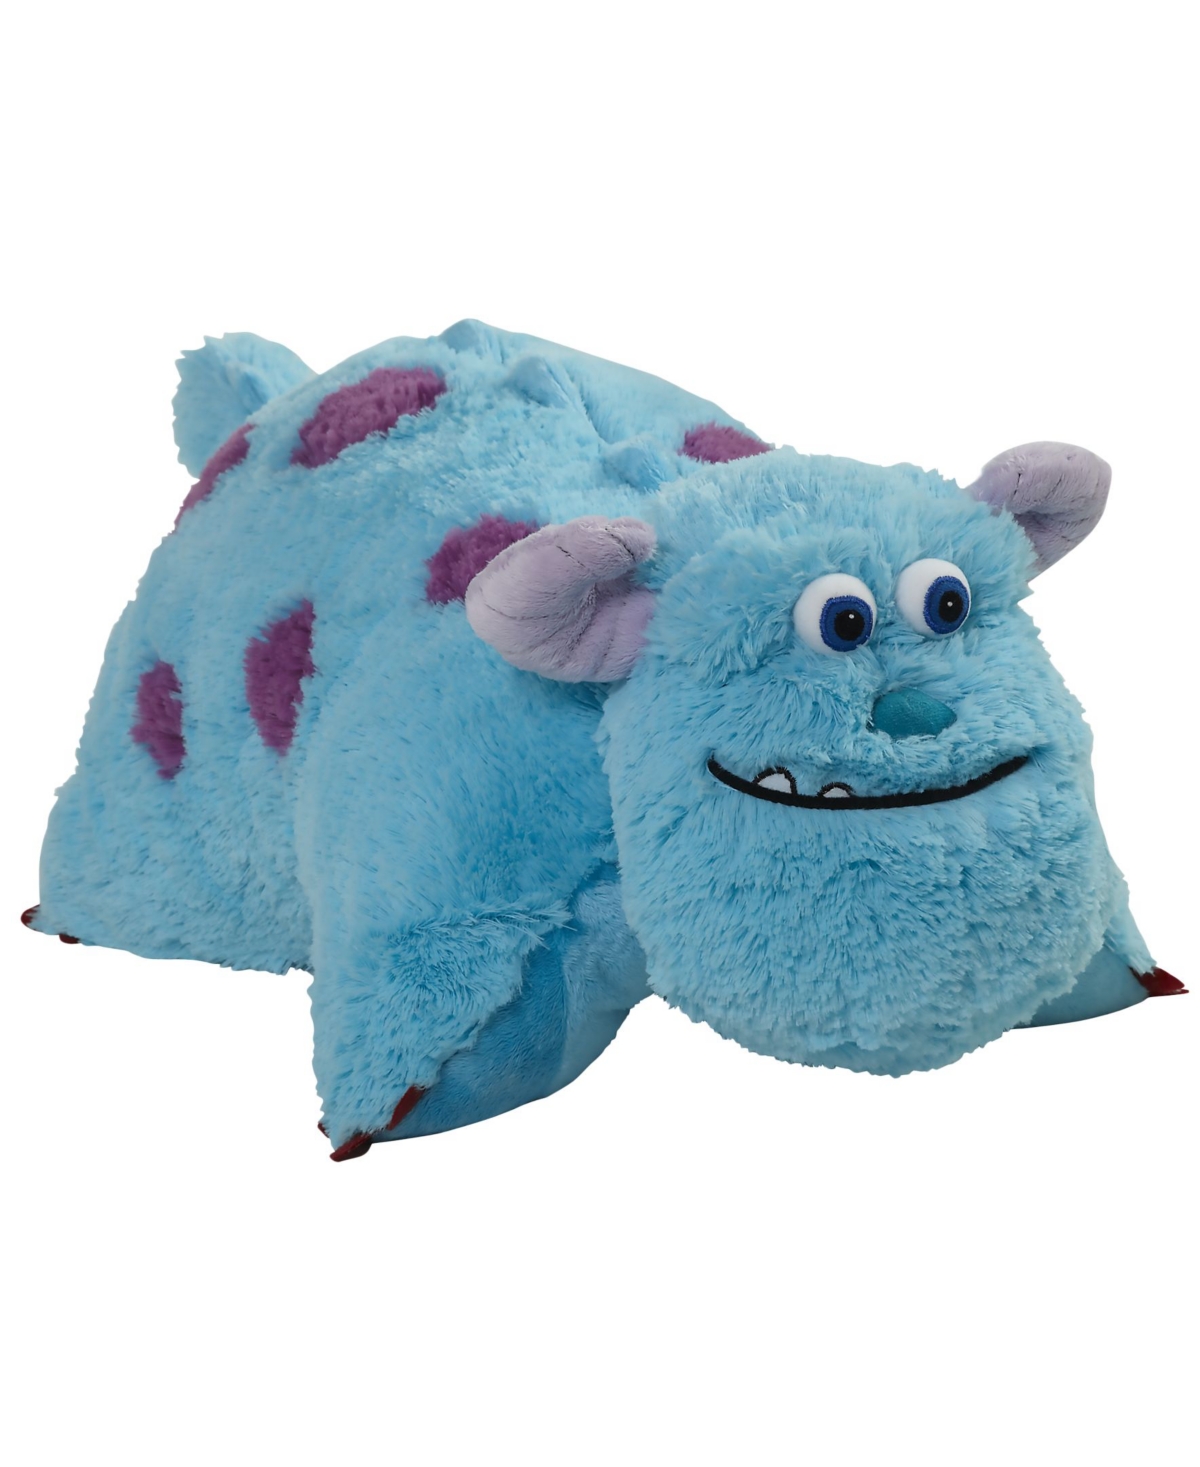 Pillow Pets Kids' Disney Monsters Incorporated Sulley Stuffed Animal Plush Toy In Blue